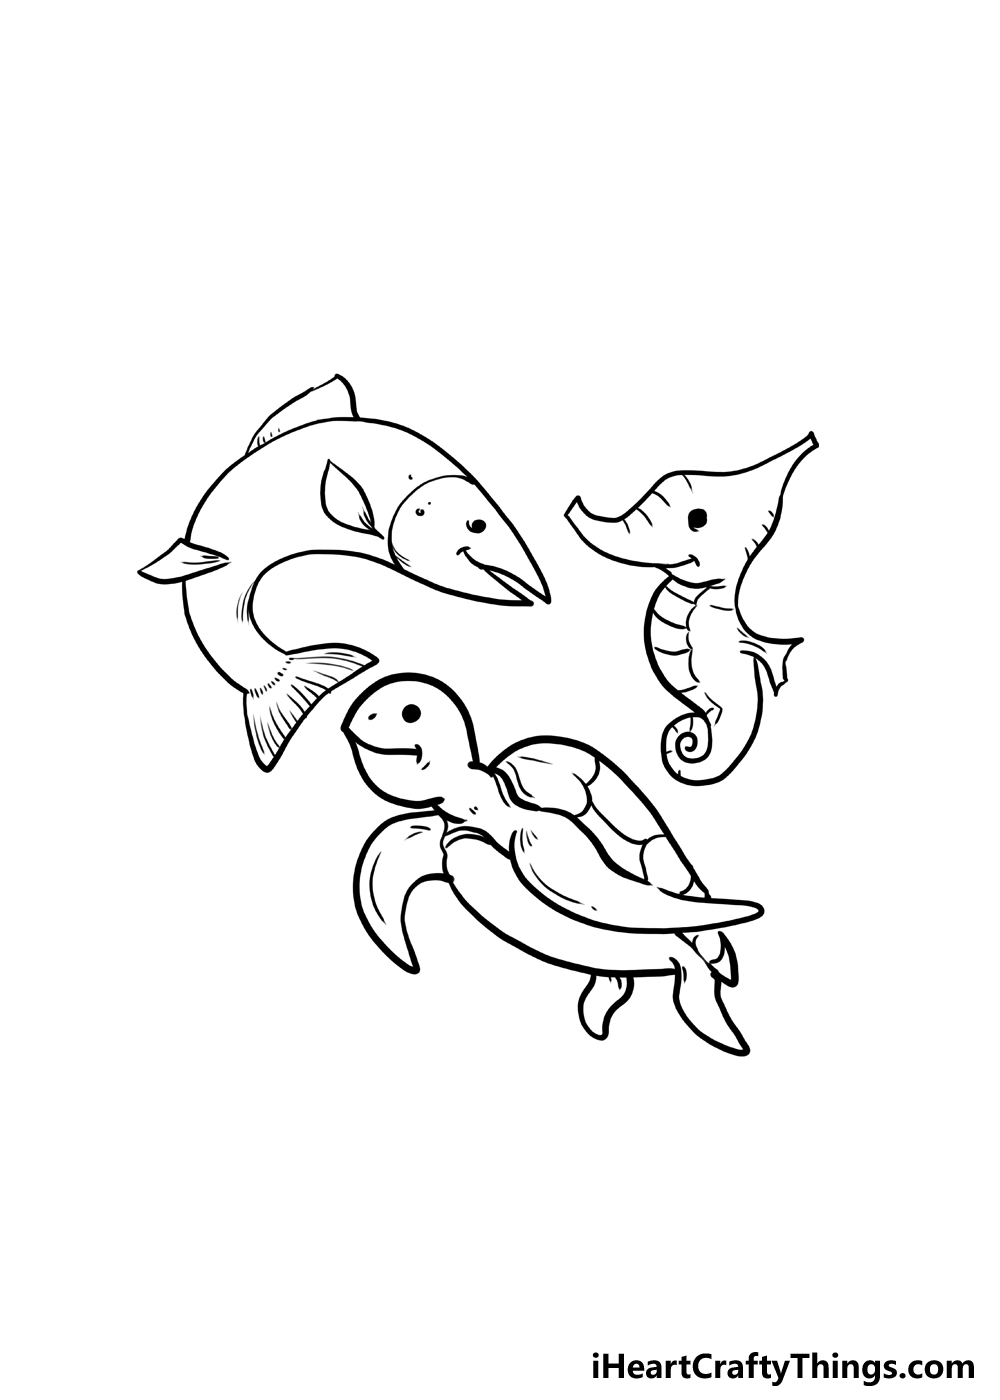 How to Draw Sea Animals step 5